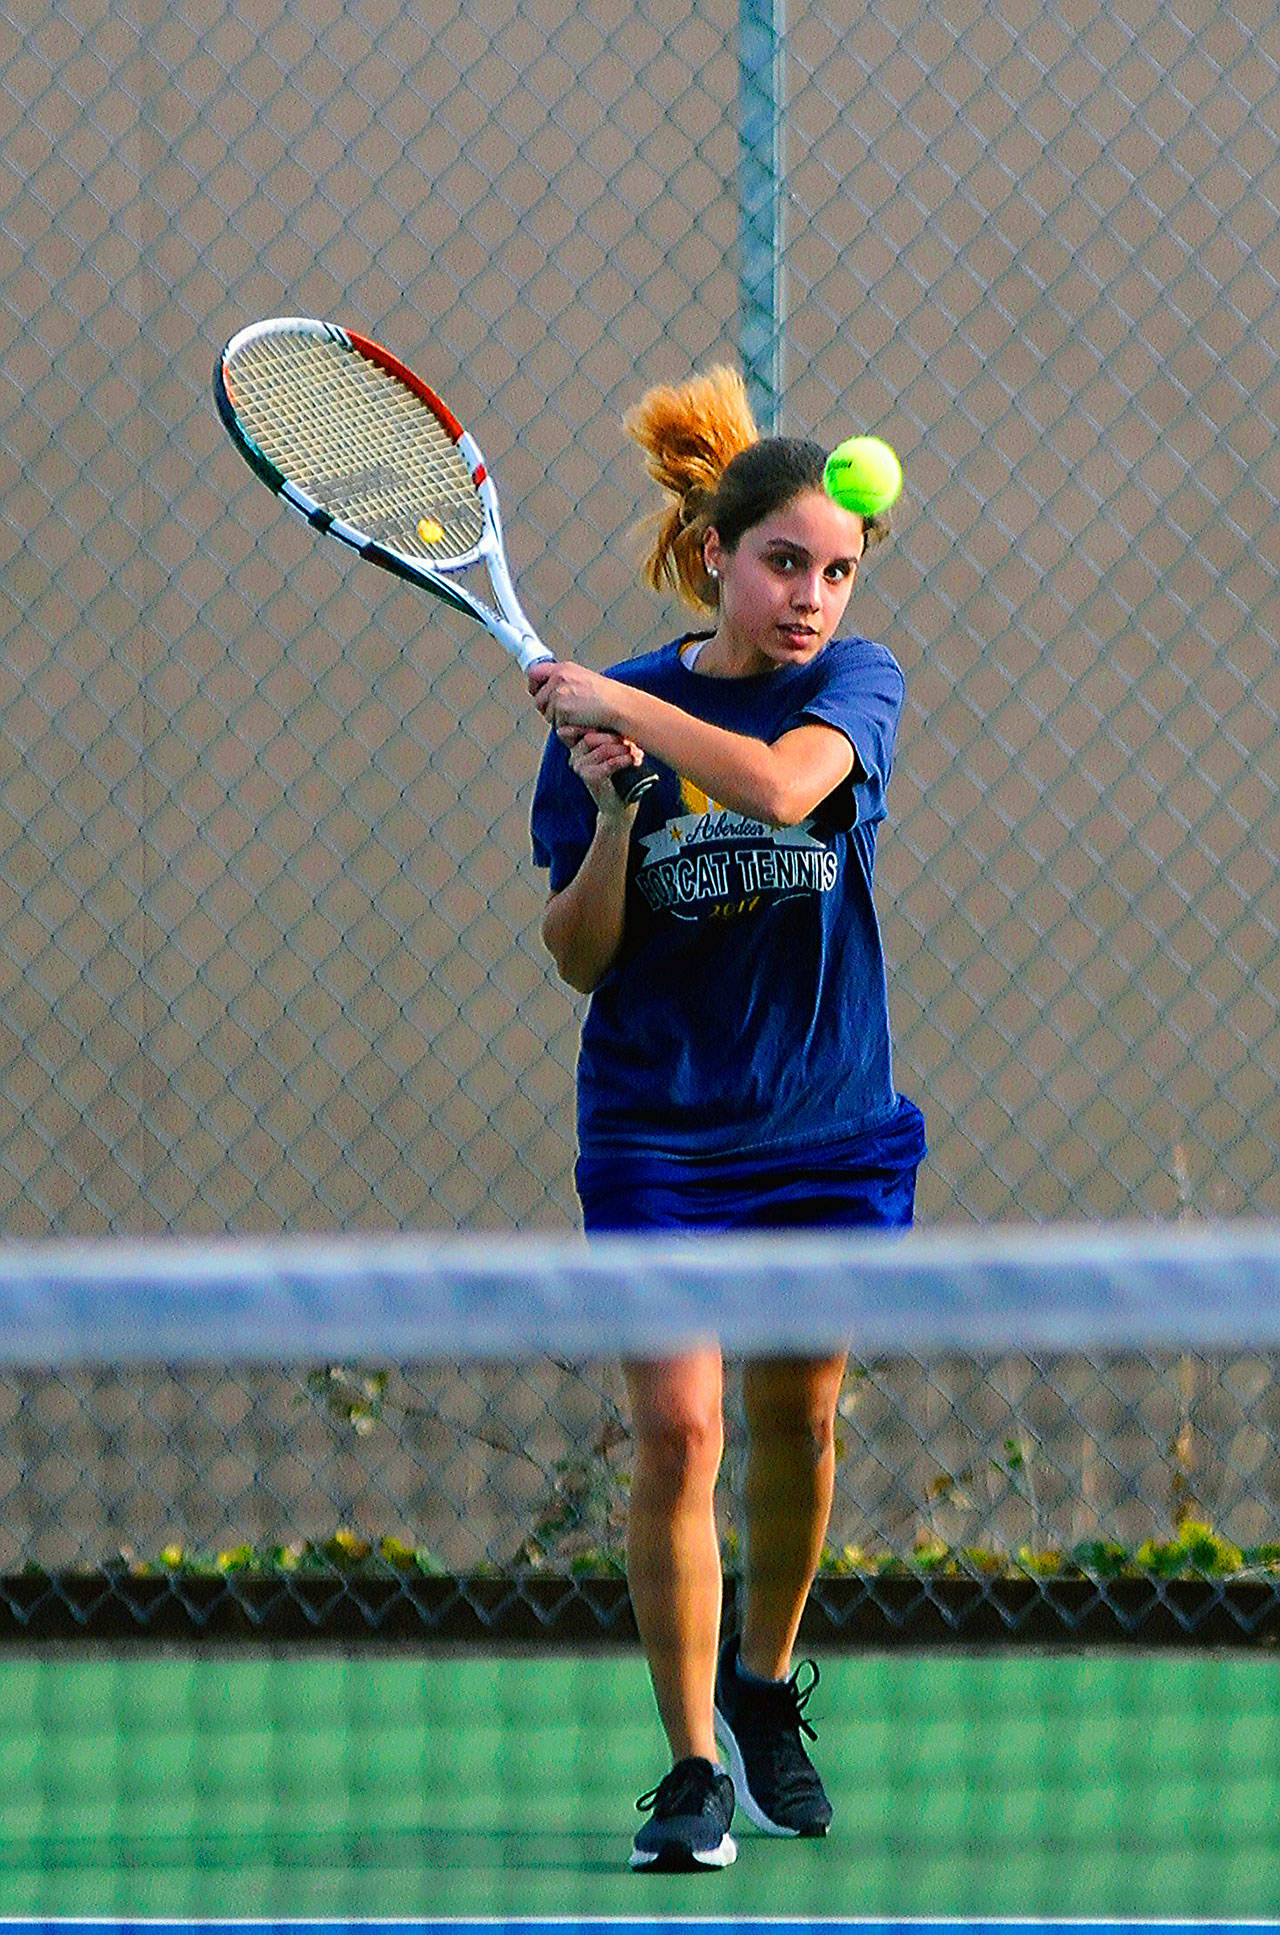 Aberdeen’s Kylie Knodel hits a back and shot in first set of a match against Tenino’s Thiresa Sath on Friday. (Hasani Grayson | Grays Harbor News Group)